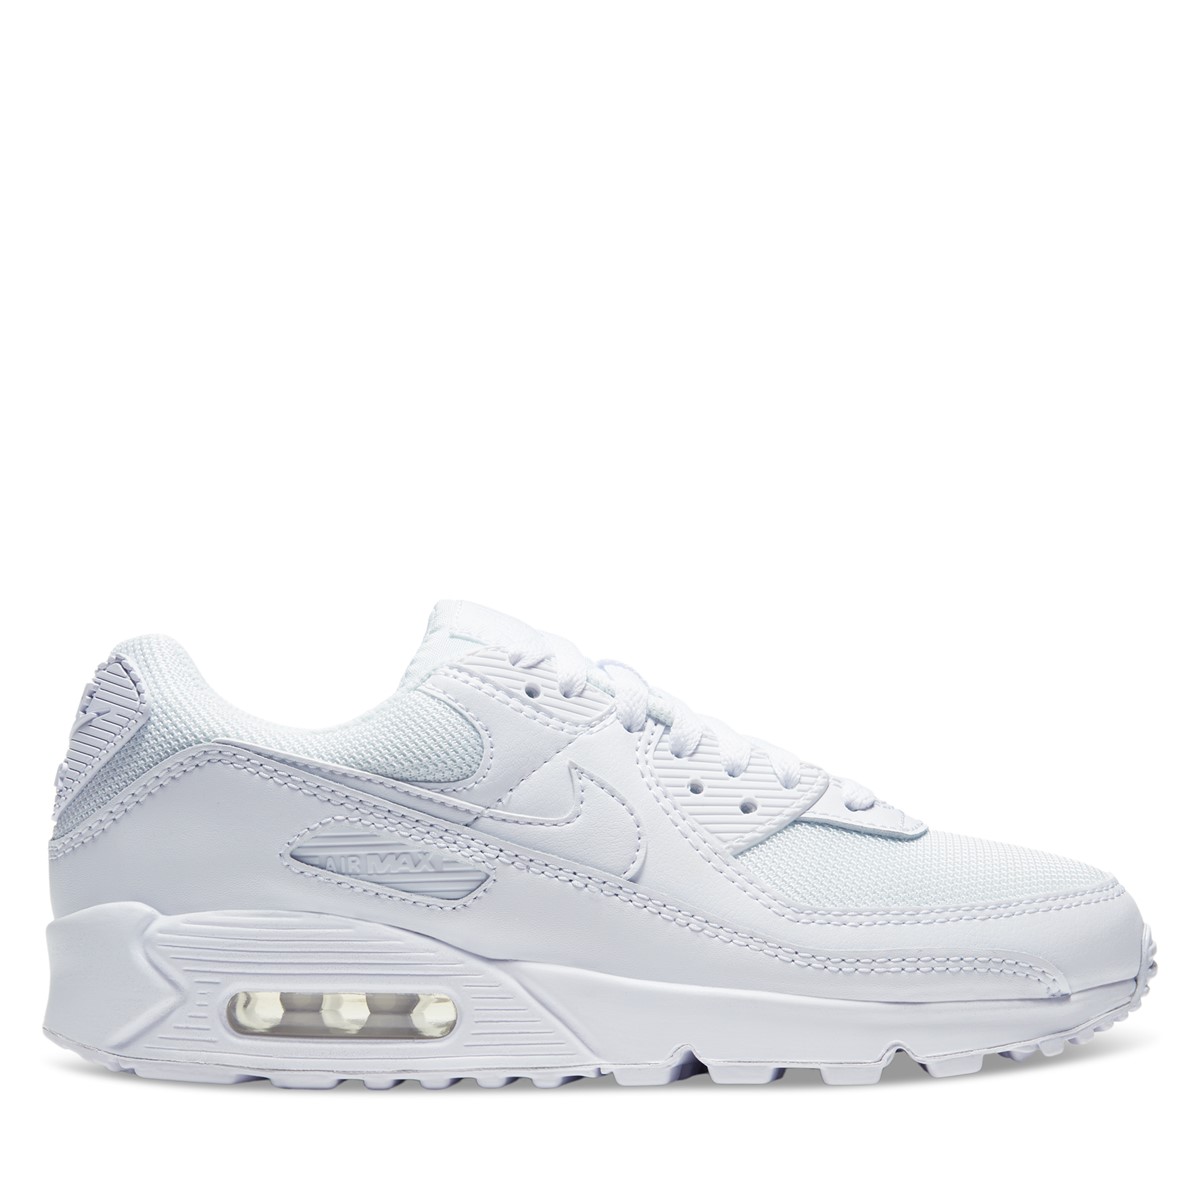 Women's Air Max 90 Sneakers in White/Grey